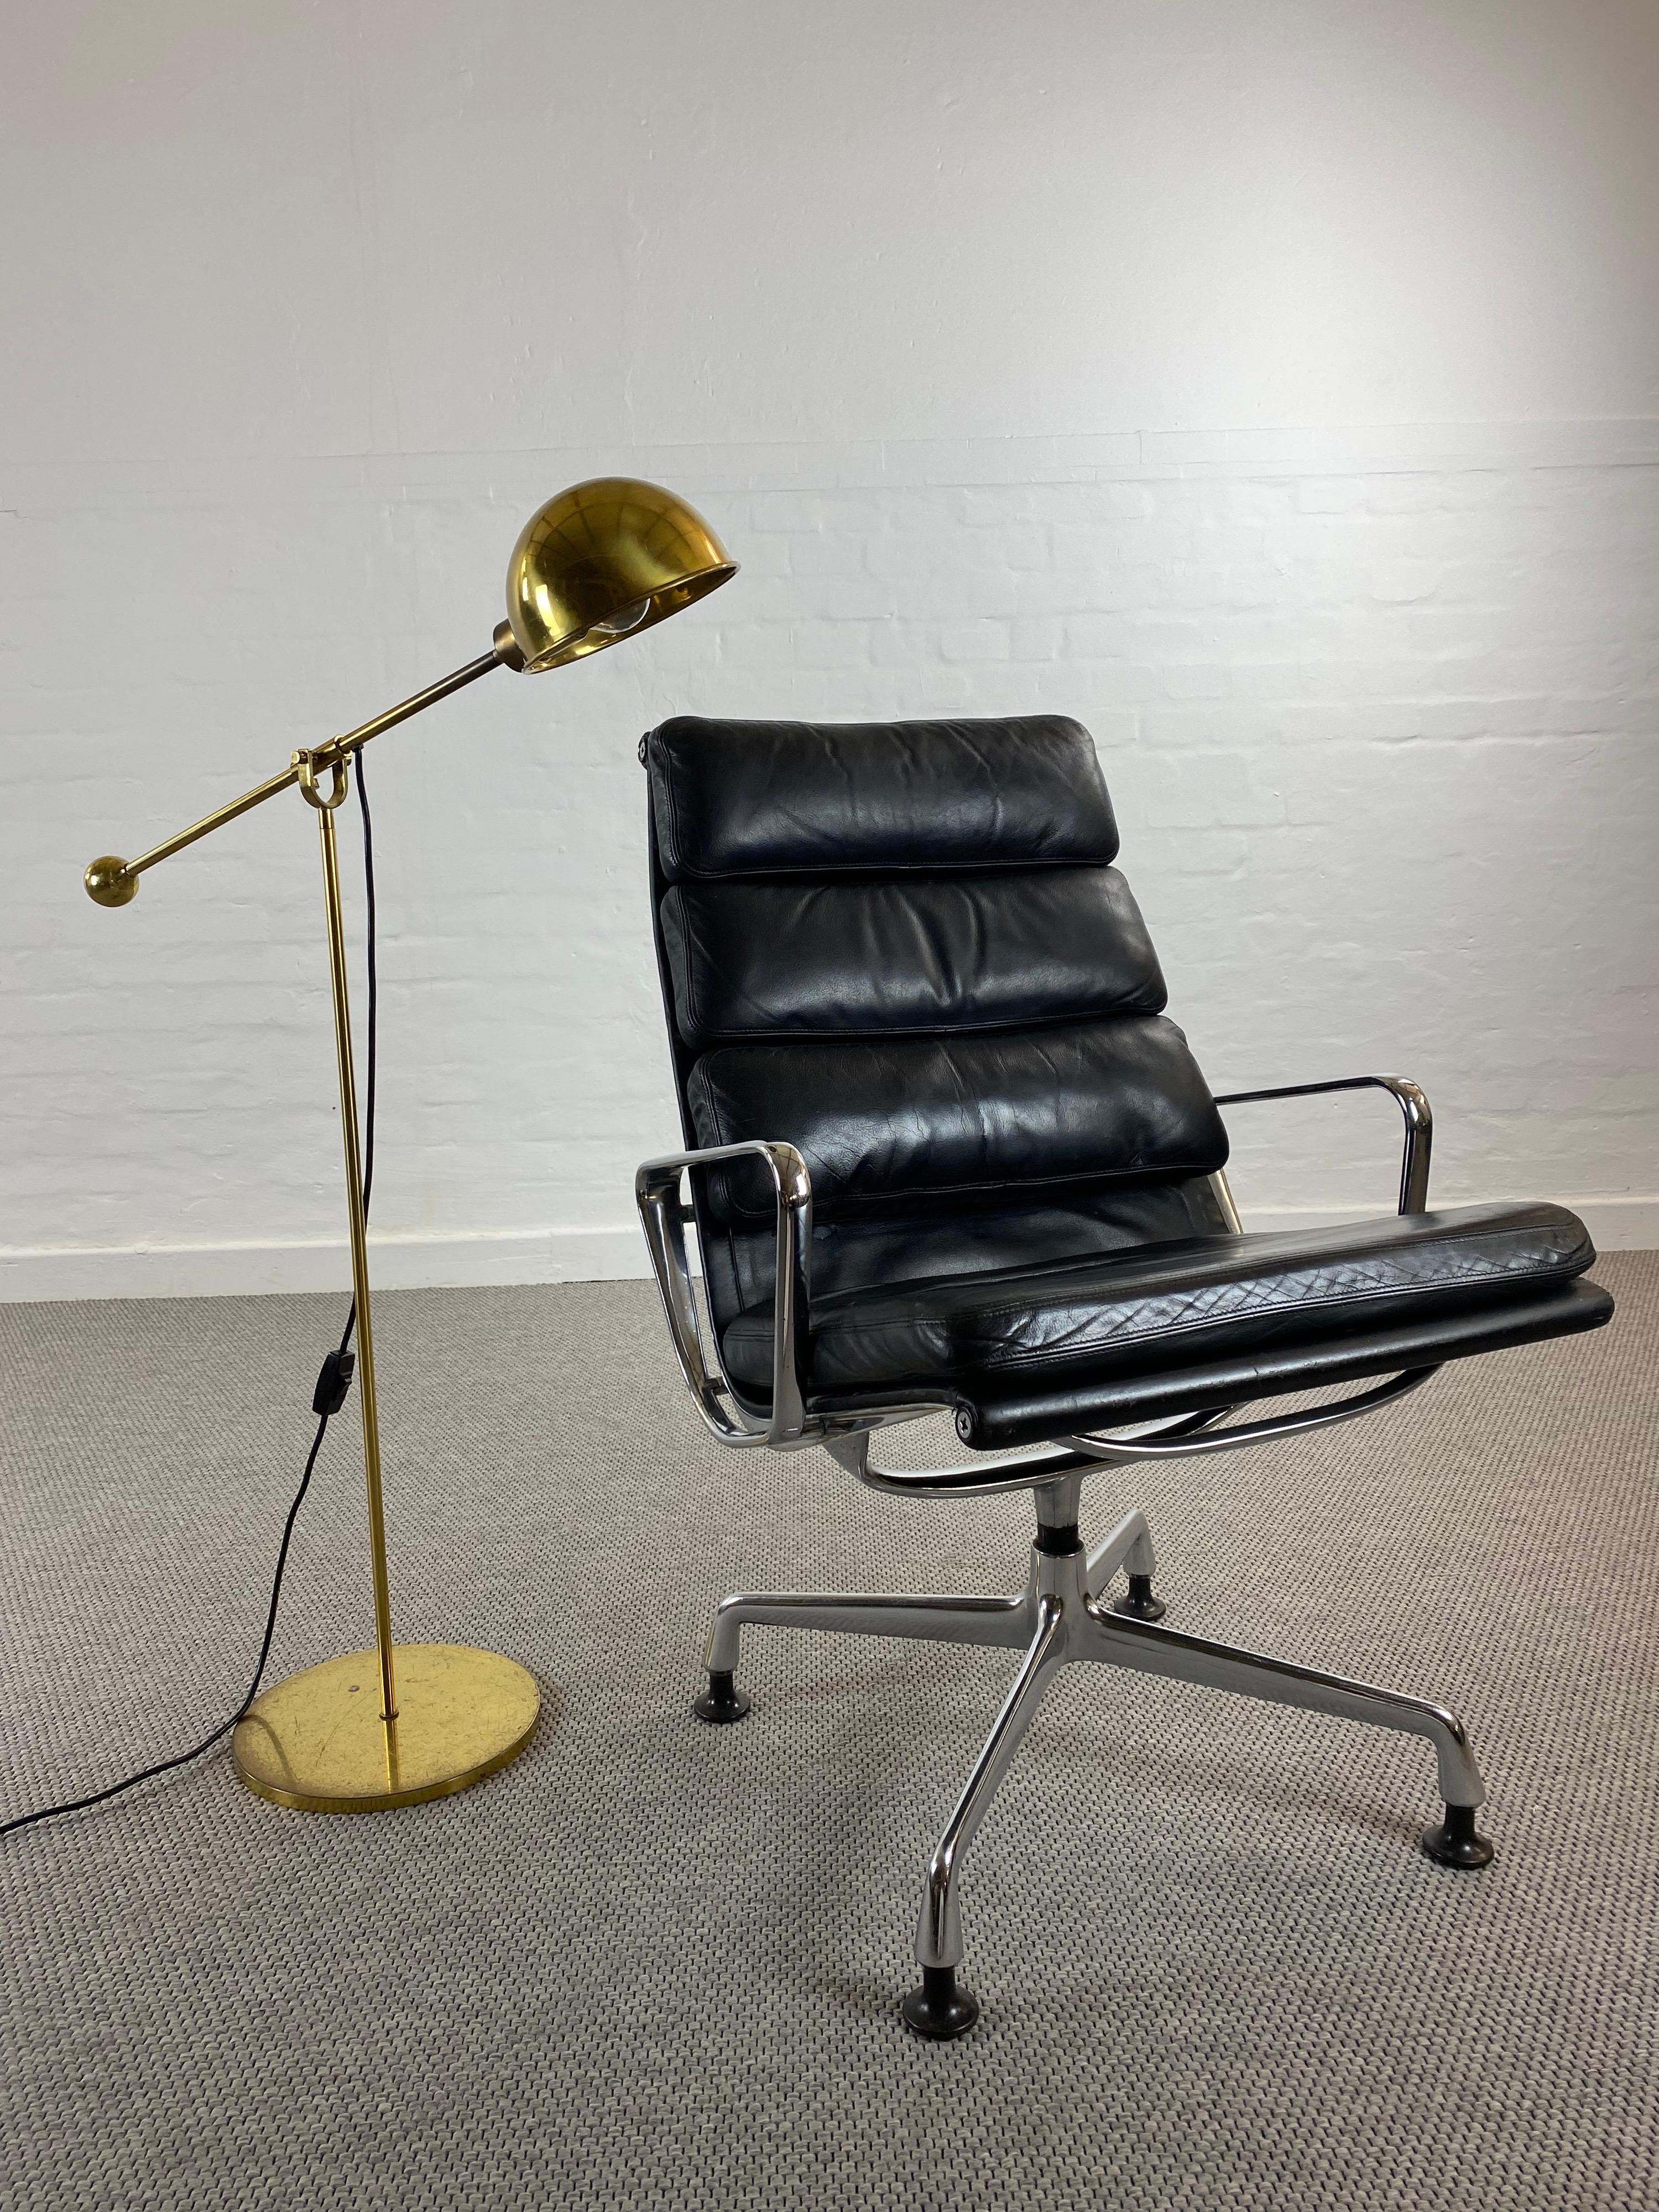 Midcentury Reading Lamp in Solid Brass with Counterbalance by Florian Schulz For Sale 2